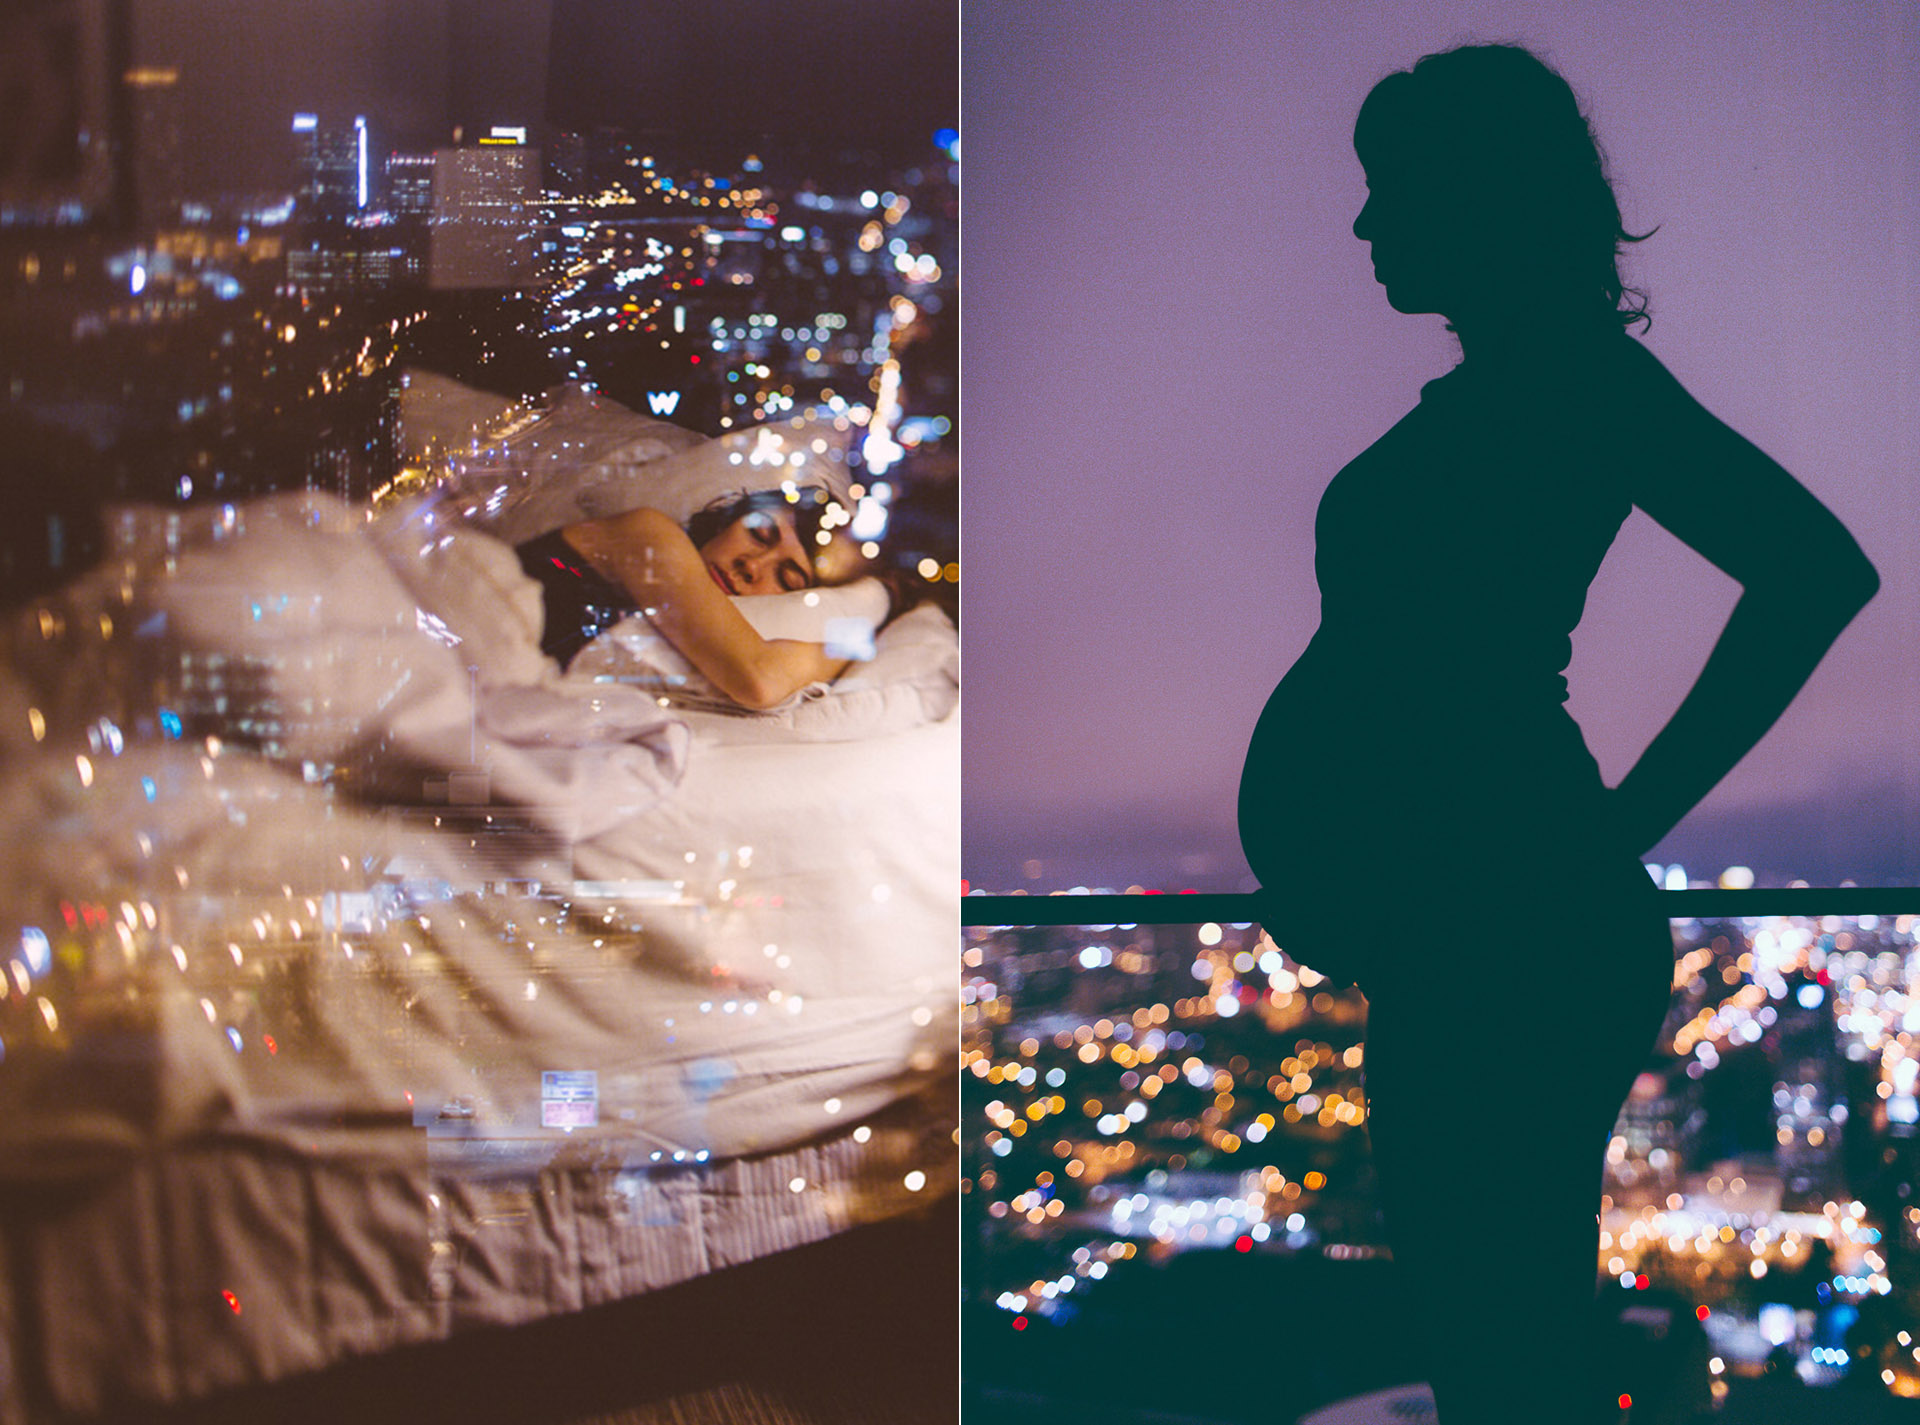 Angela Clunk Maternity Photos During Pregnancy - too much awesomeness photography - image 32.jpg